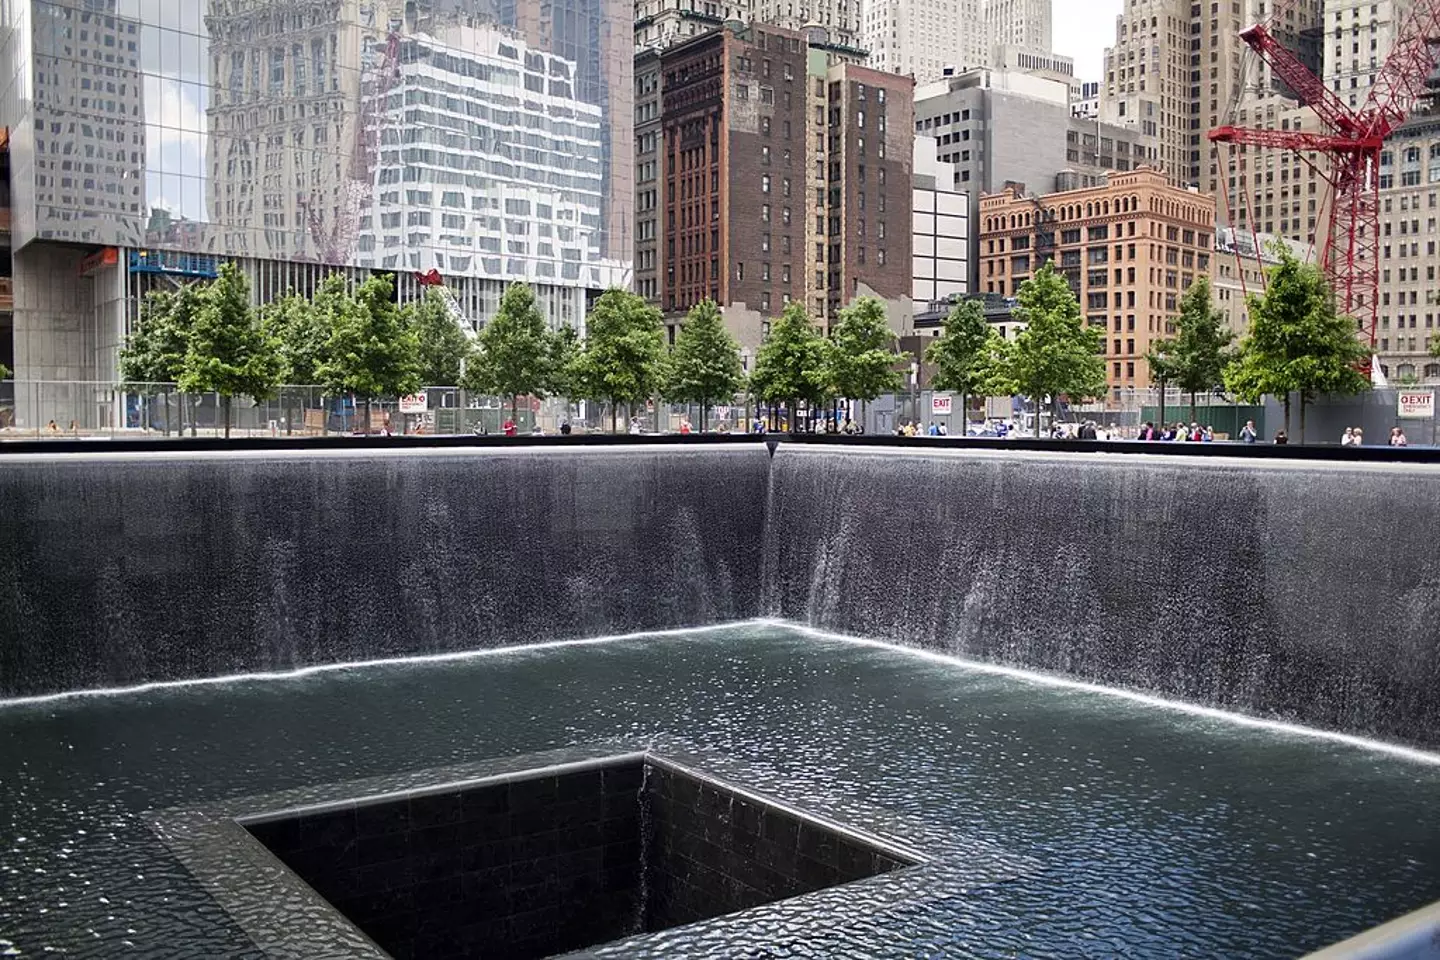 The 9/11 memorial pools were designed by Michael Arad and landscape architect Peter Walker.